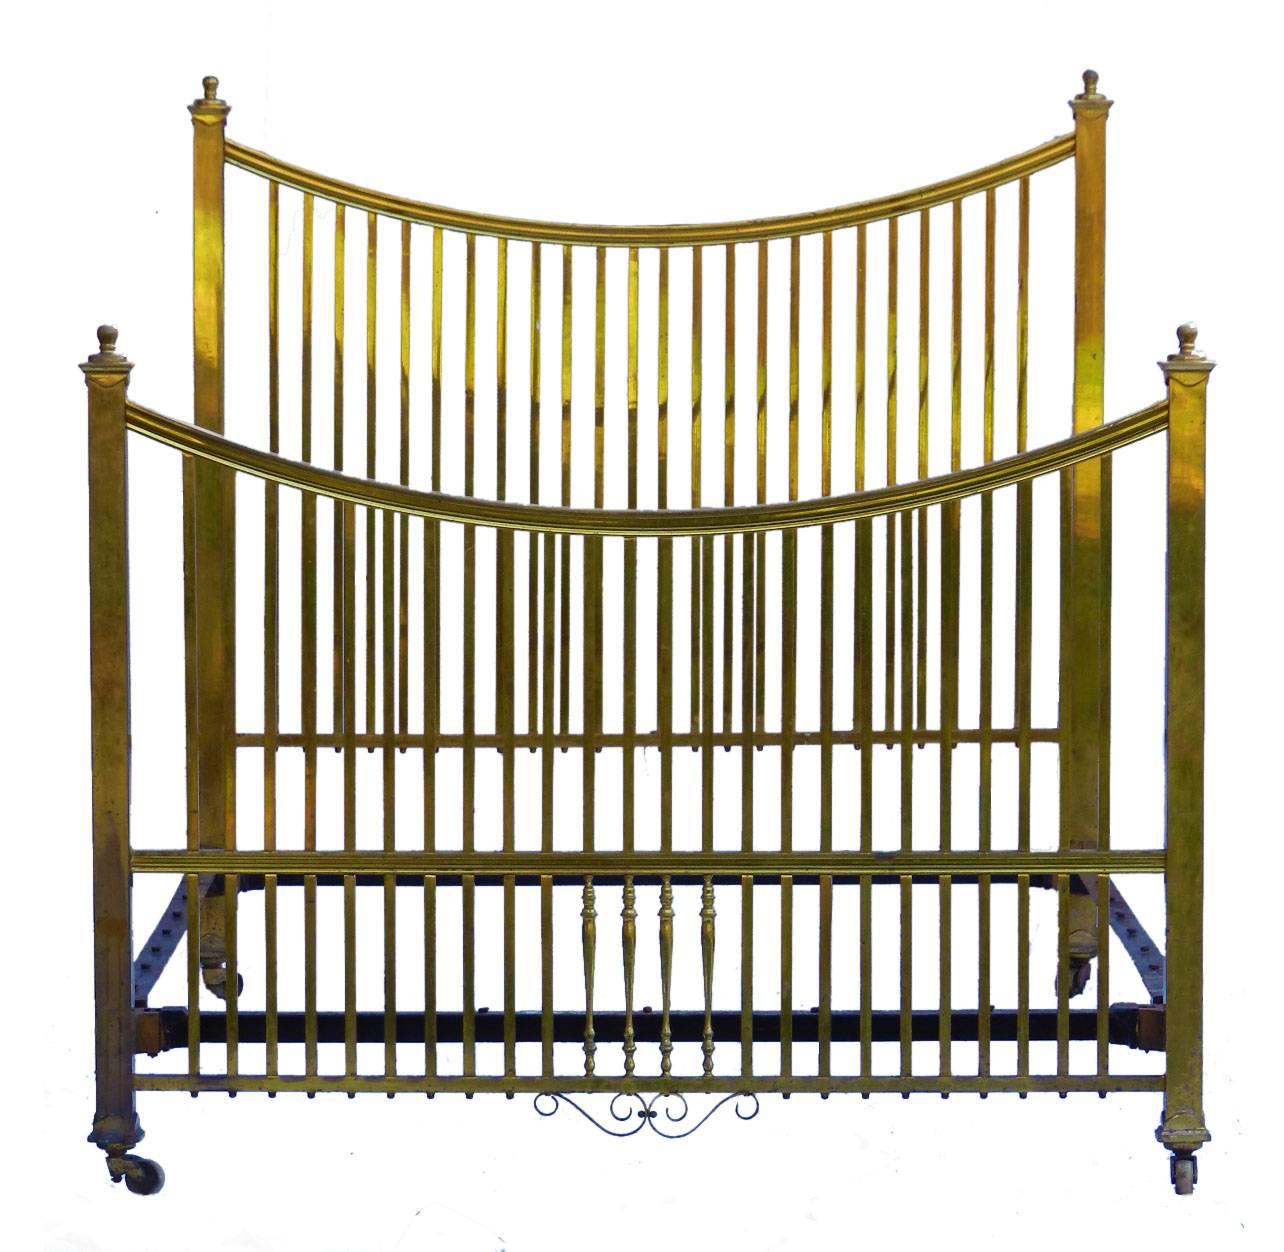 Brass bed Maple & Co antique US Queen UK king-size
Rare US Queen UK King-size
Original Maple & Co label
English, circa 1900-1910
Measures: Width 151cm (60ins), length 205cm (81ins)
Foot height 121cms (48ins)
This will take a standard US Queen